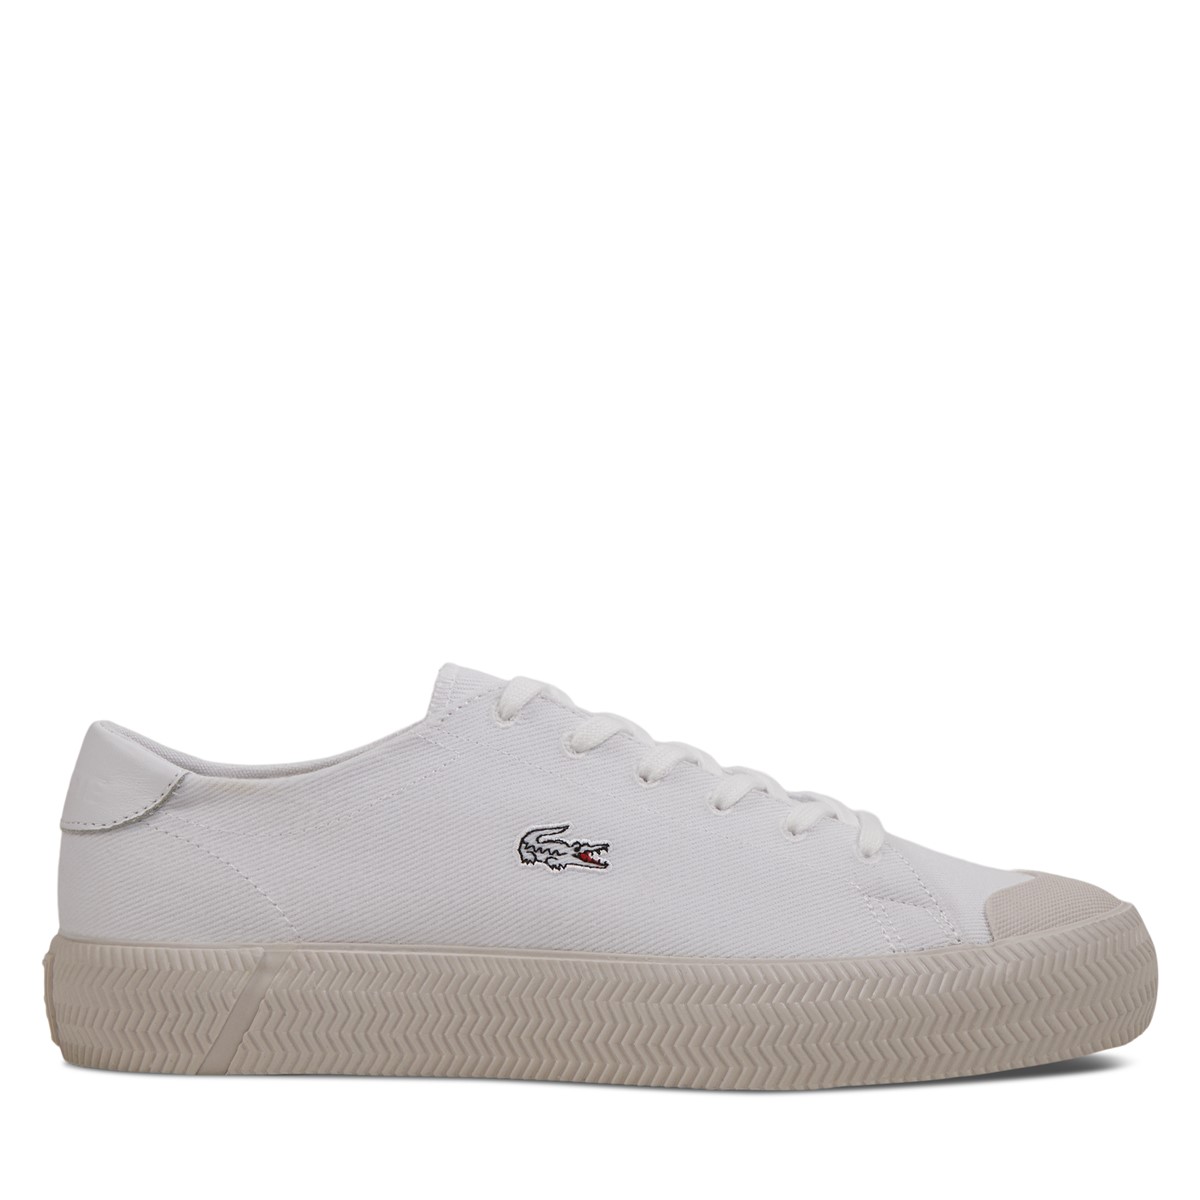 Women's Gripshot Sneakers in Off-White/White